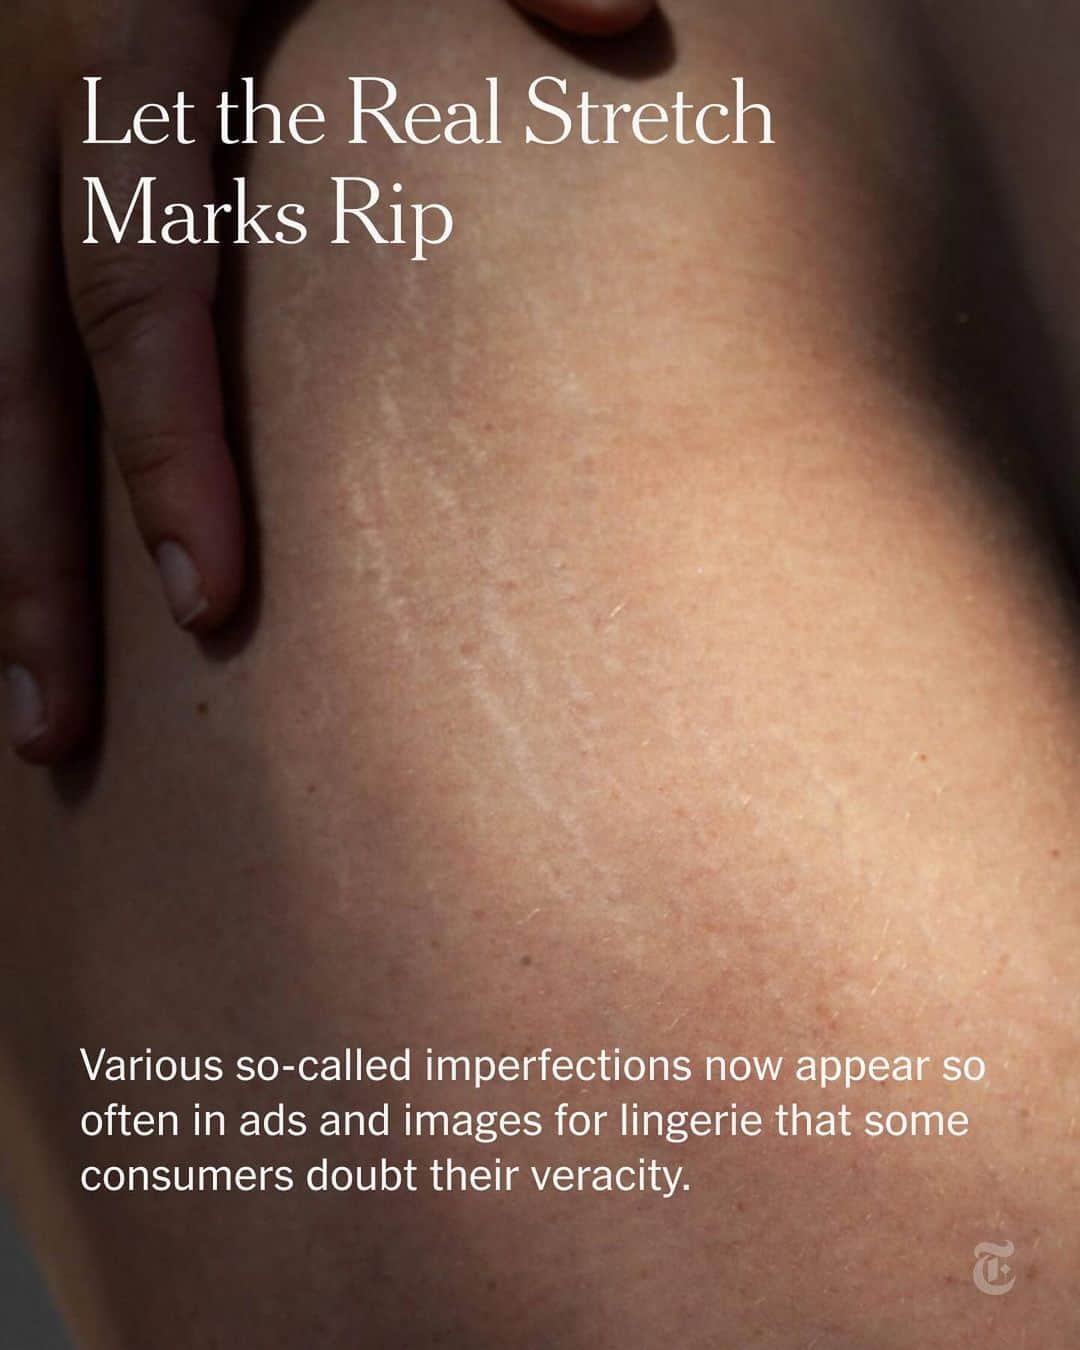 New York Times Fashionのインスタグラム：「In the past decade, newer underwear brands have focused on so-called imperfections — stretch marks, in particular. In the lingerie business, the once-verboten “flaw” is approaching industry standard, becoming as ubiquitous as cleavage.   After smaller intimates including Negative and Cuup cast models with stretch marks, some big-box retailers followed suit. Stretch marks (often seen on otherwise thin models) have appeared in product shots for ASOS, Boohoo, Missguided and Target, among others. The result has left consumers feeling skeptical.   Is it progress if a perceived blemish becomes a trend? Click the link in the bio to read more from @matkahn. Photo by @spicerjeanette_」